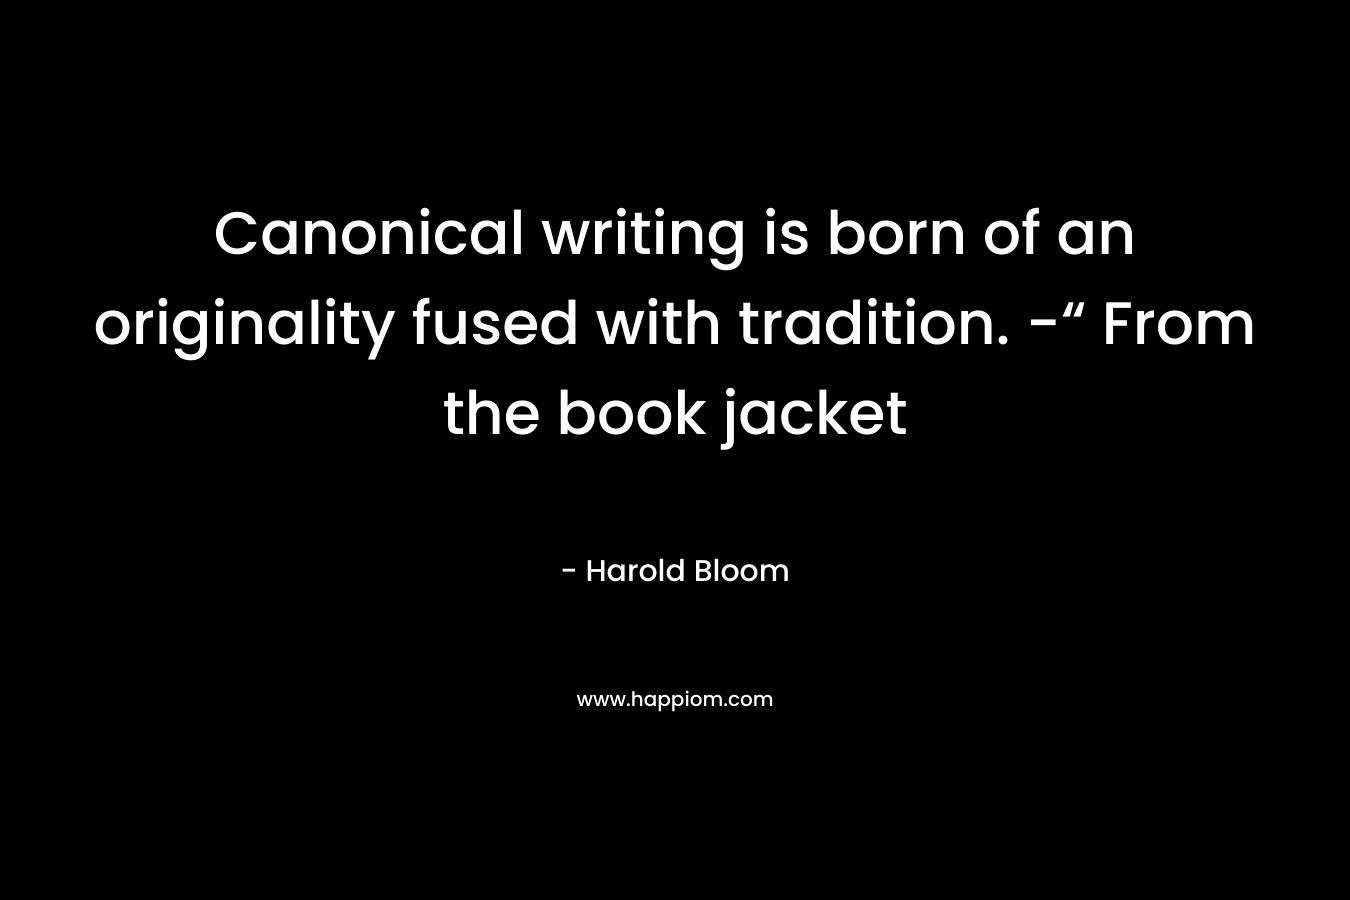 Canonical writing is born of an originality fused with tradition. -“ From the book jacket – Harold Bloom